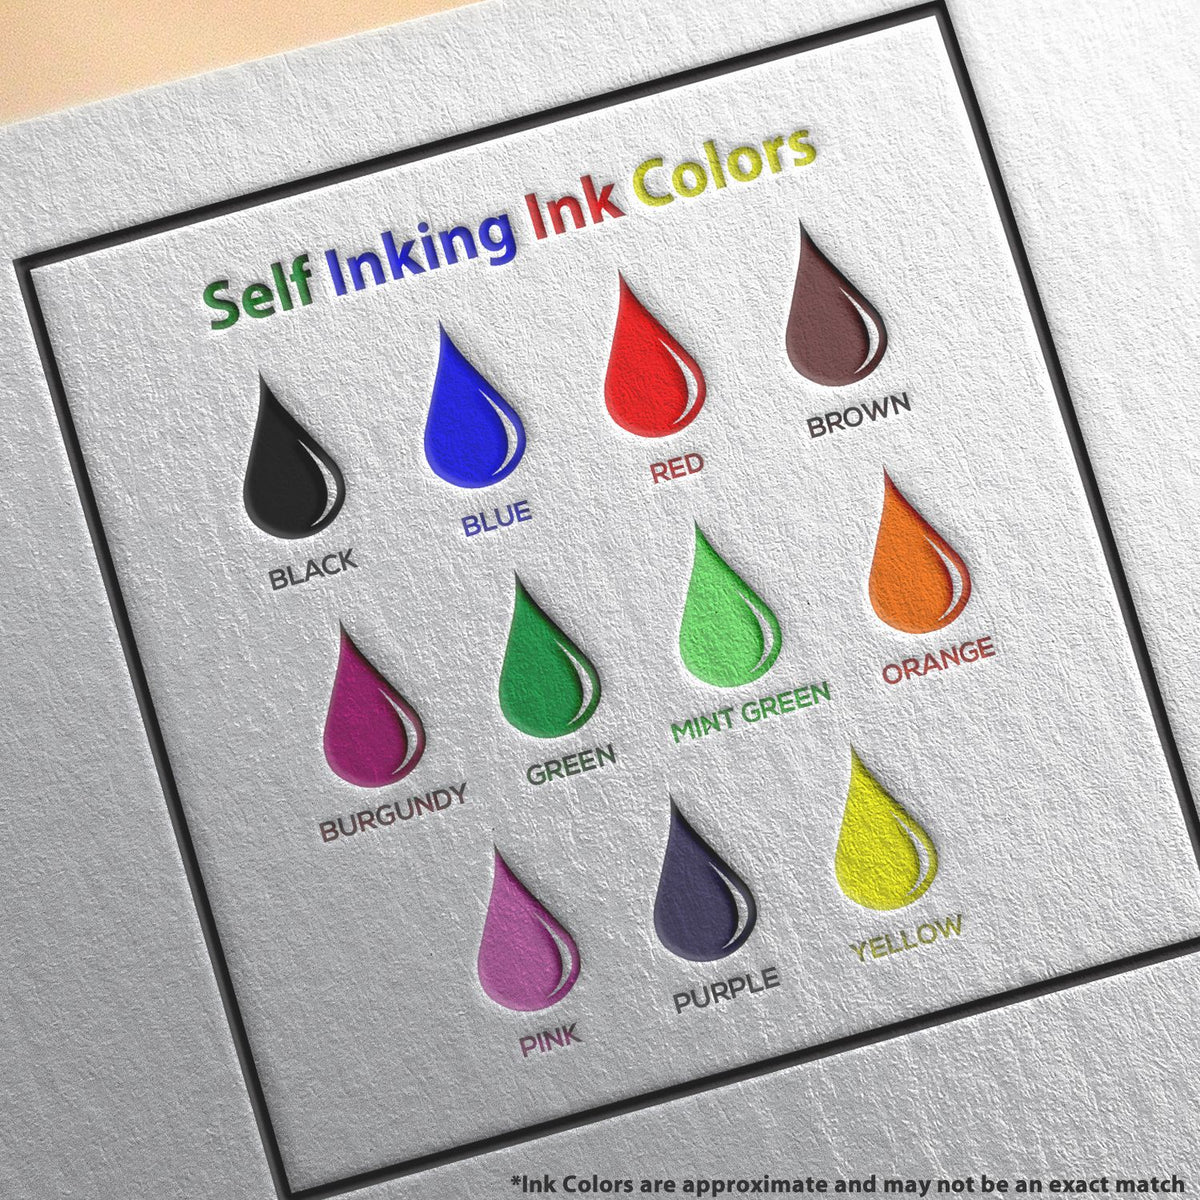 A picture showing the different ink colors or hues available for the Self-Inking South Dakota Geologist Stamp